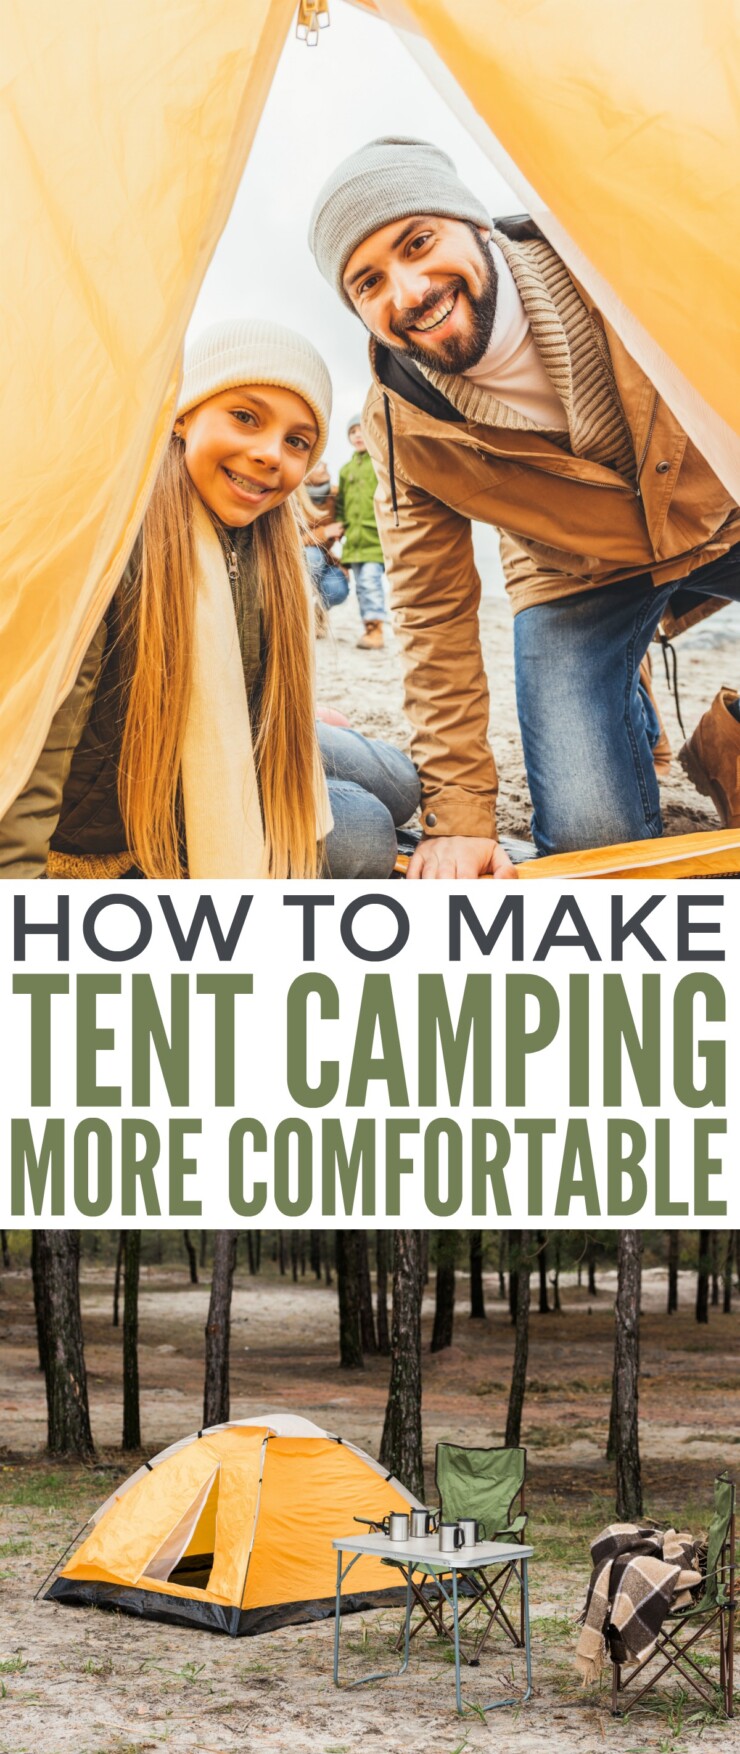 Are you looking to make your next camping trip more comfortable? Check out these tips for making tent camping more enjoyable!